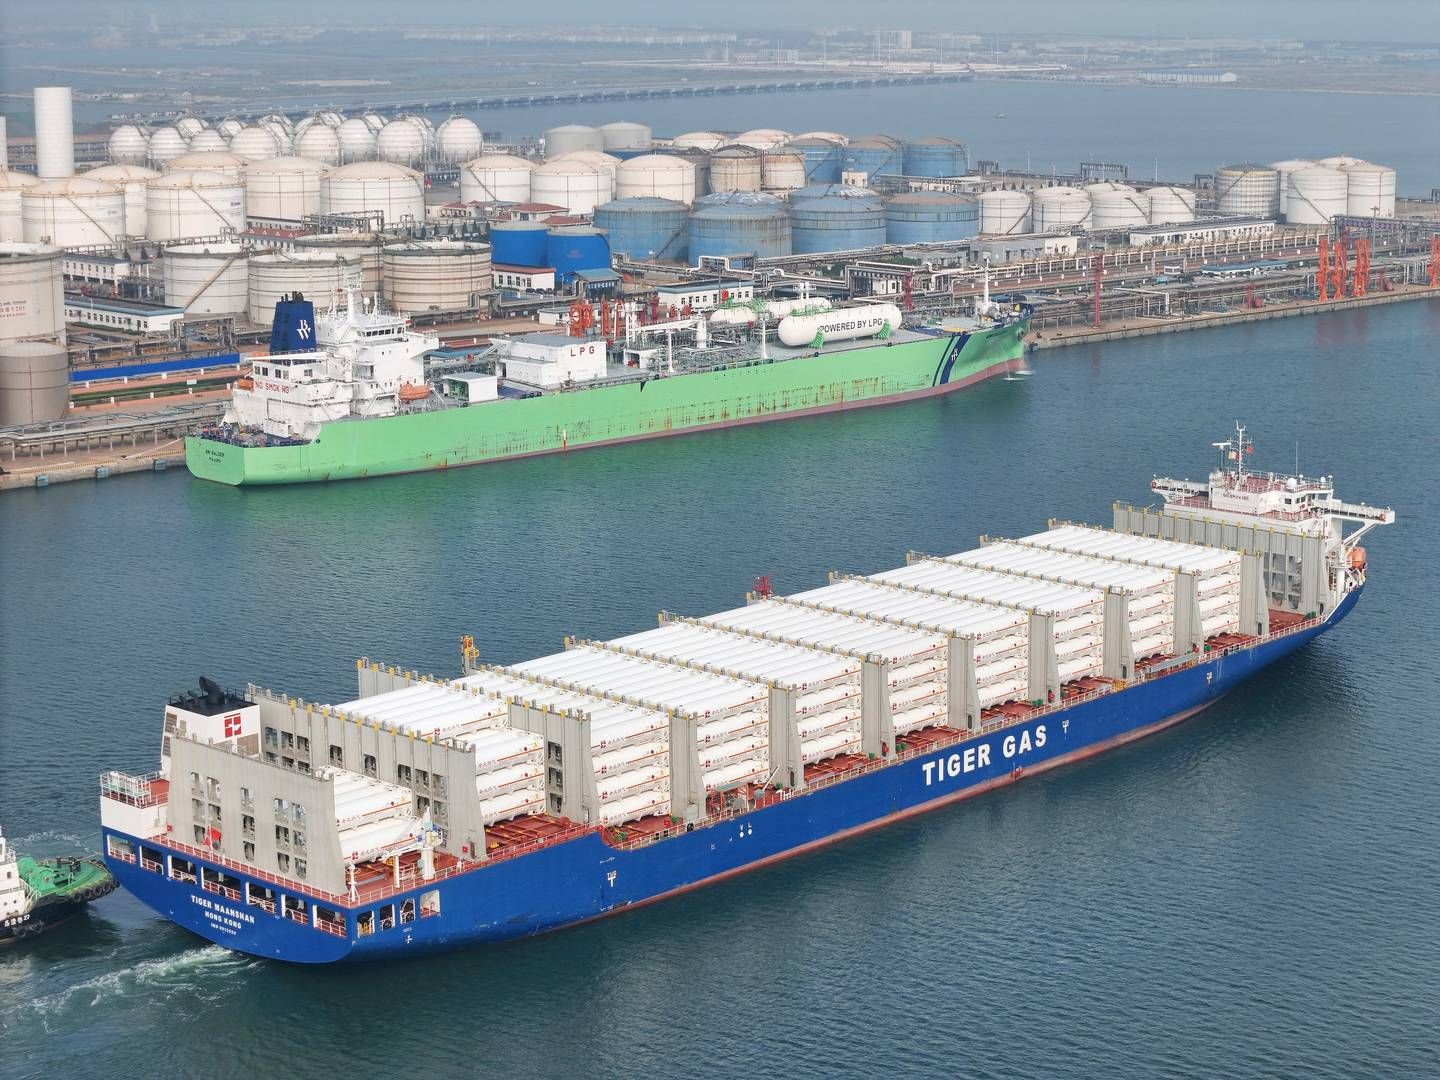 ”This is absorbing up to 50% more capacity than if the vessels sailed via Panama Canal. This is reflected in a sharp increase in spot rates, ” a spokesperson from Singapore-based BW LPG told ShippingWatch.